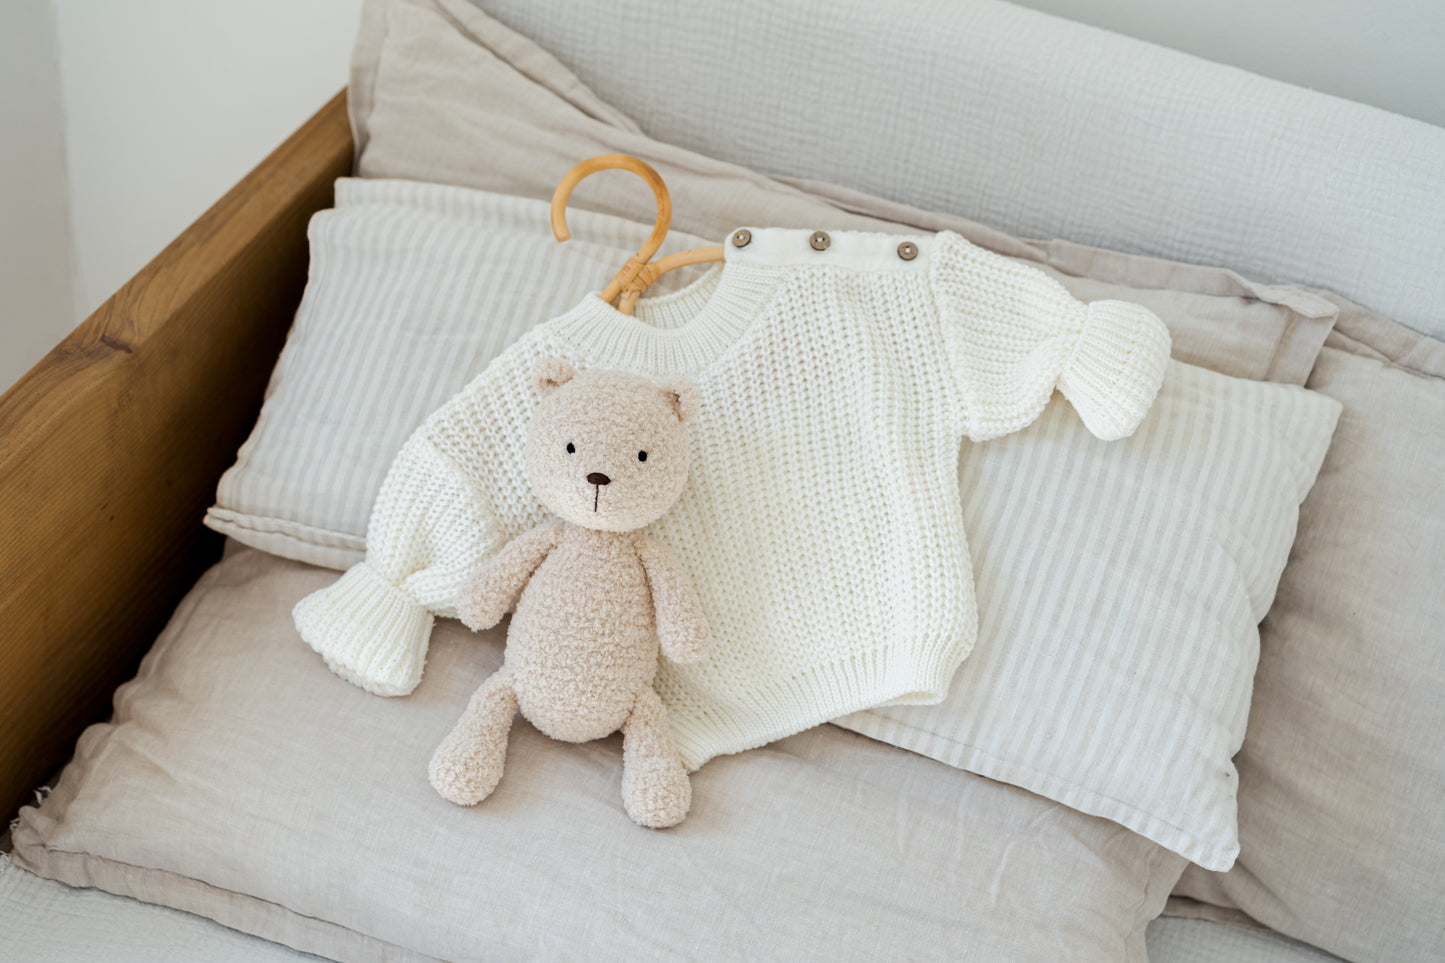 Newborn Knit Set Outfit | Chunky Sweater, Knit Bloomers and Booties in white